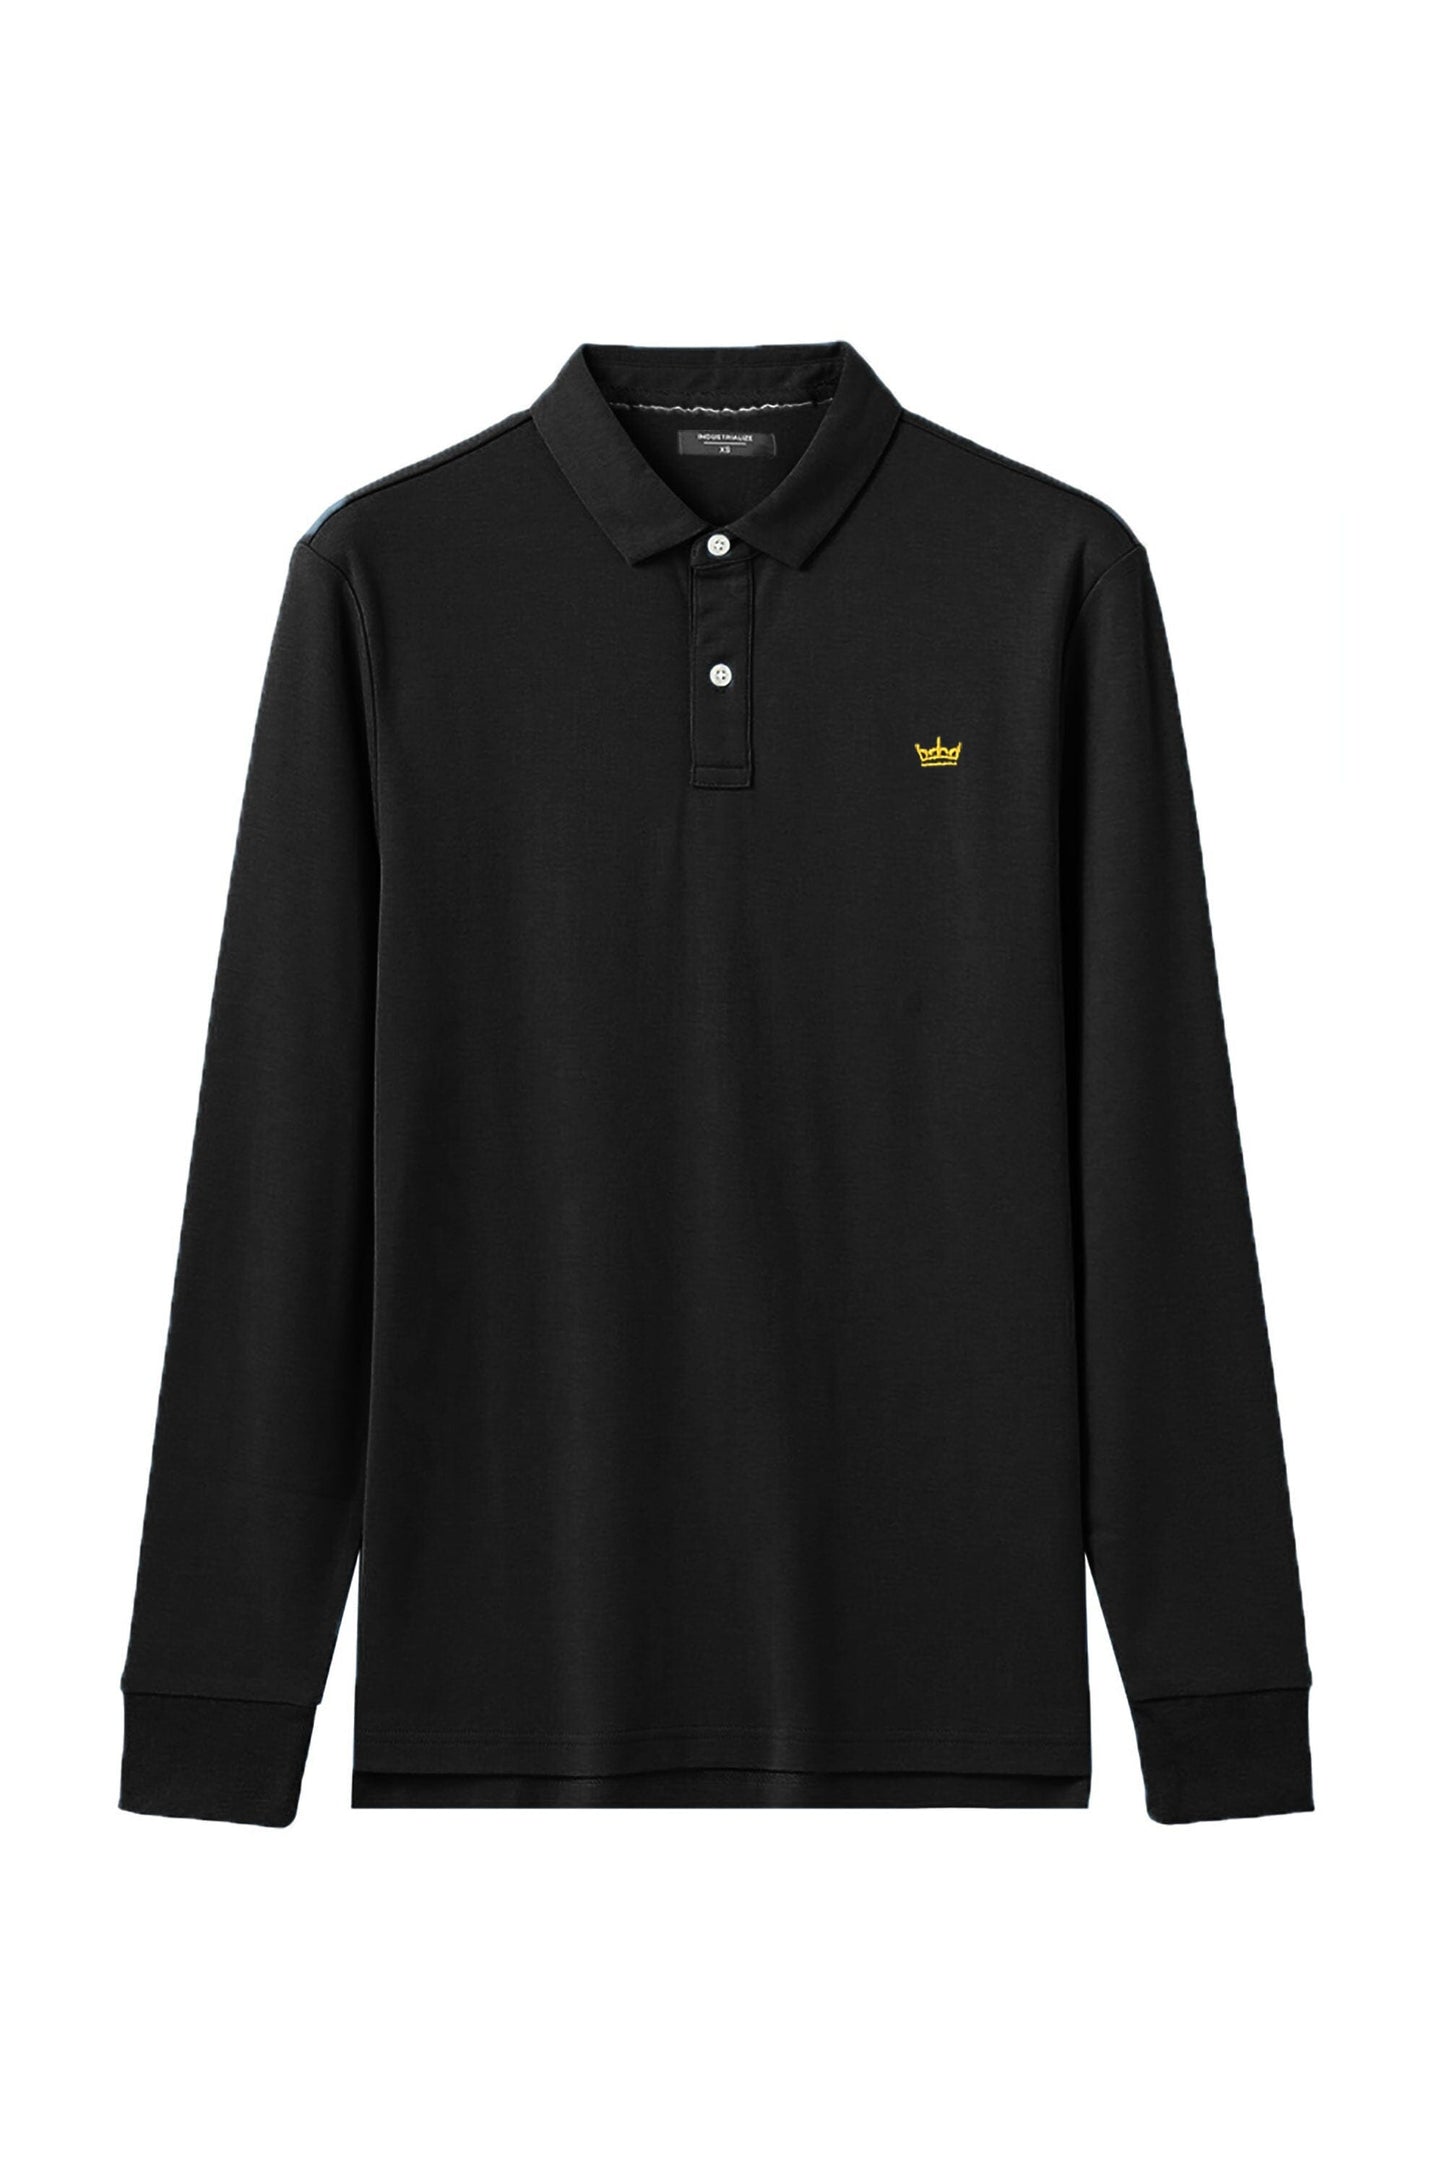 Industrialize Men's Crown Embroidered Long Sleeve Polo Shirt Men's Polo Shirt IST 